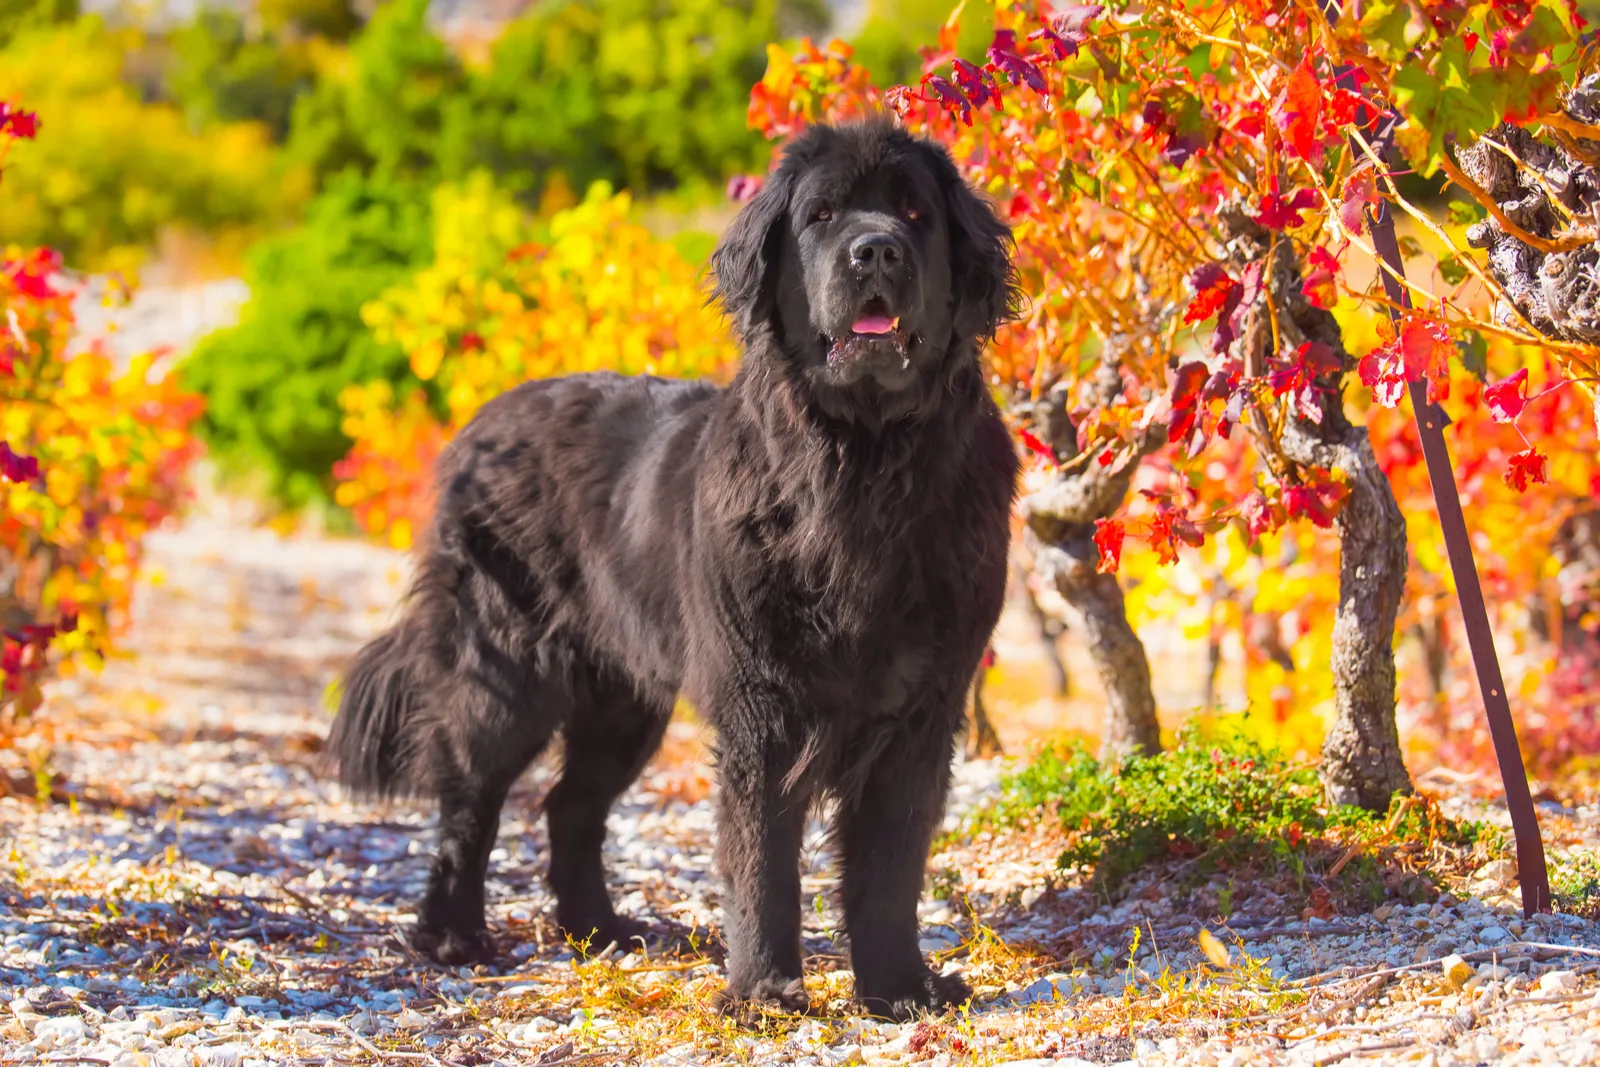 the newfoundland dog stands and stares ahead